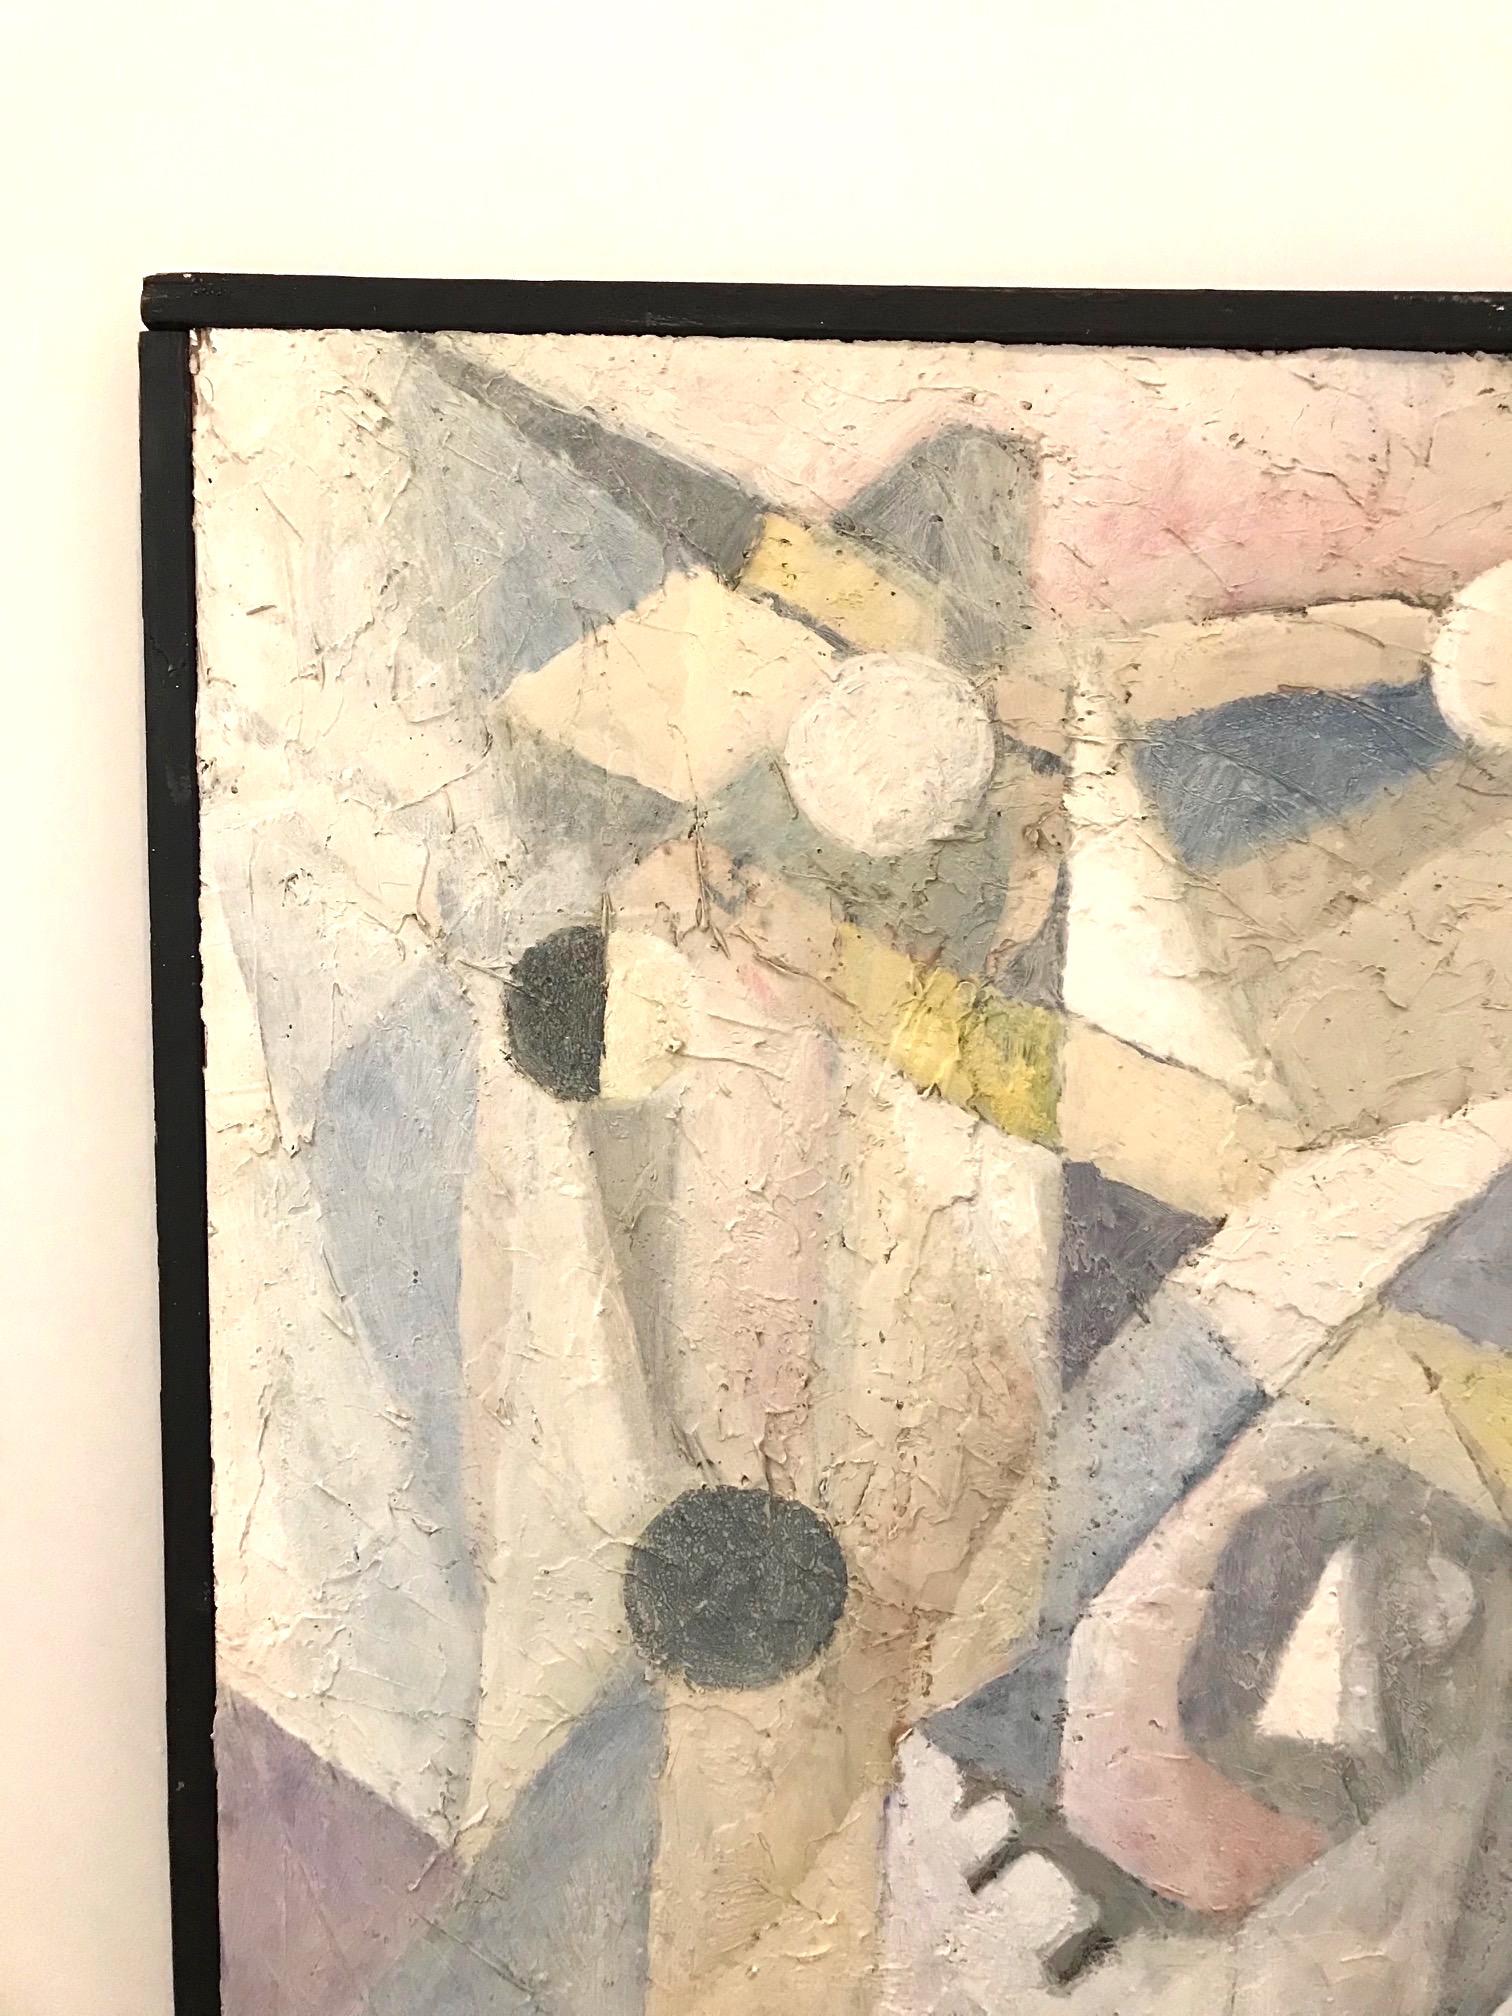 Cubo-Futurism Abstract Painting in Pastel Colors, Fresco on Board, c. 1988 For Sale 5